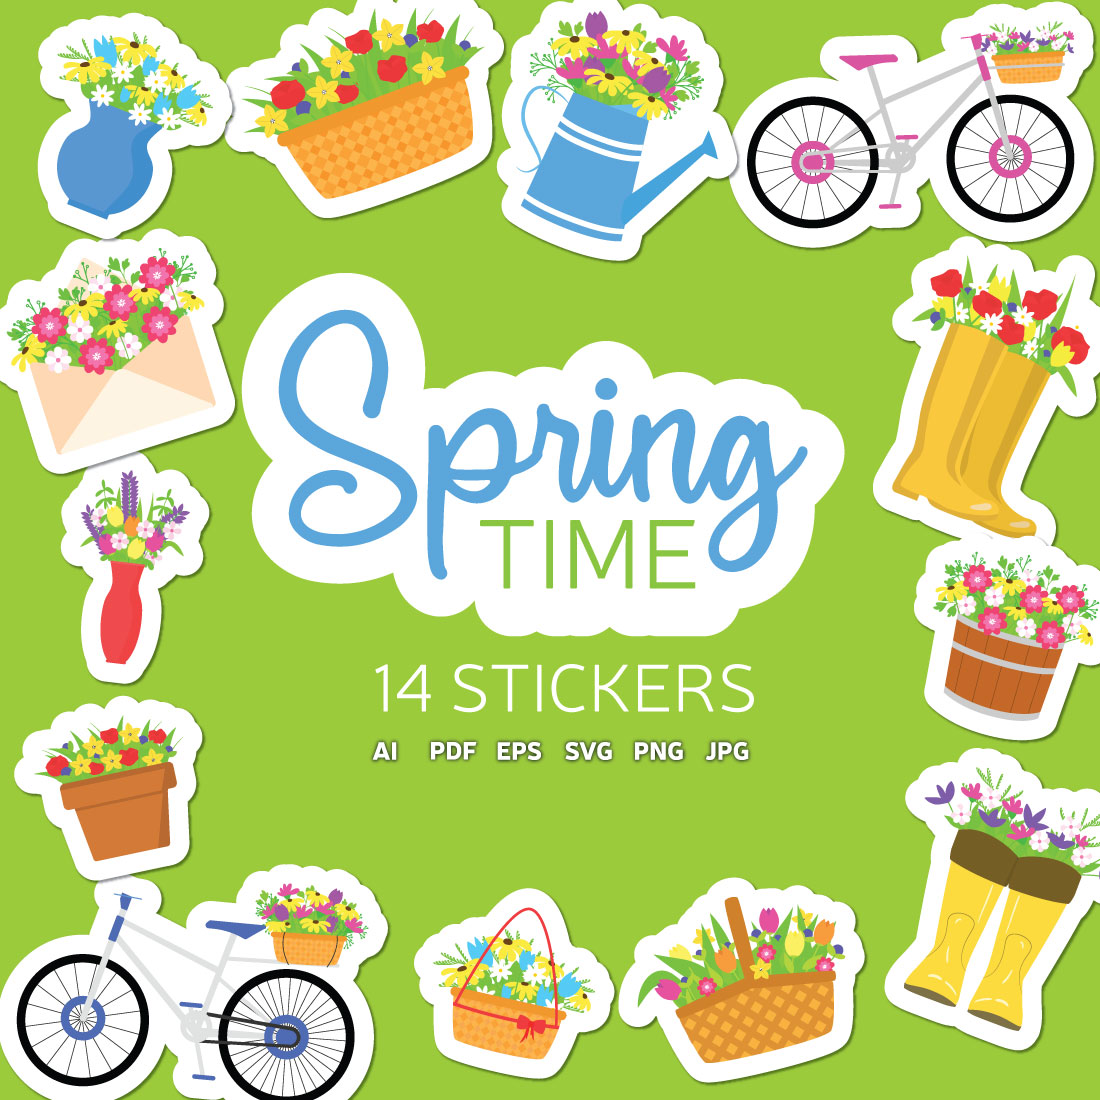 Spring Stickers cover image.